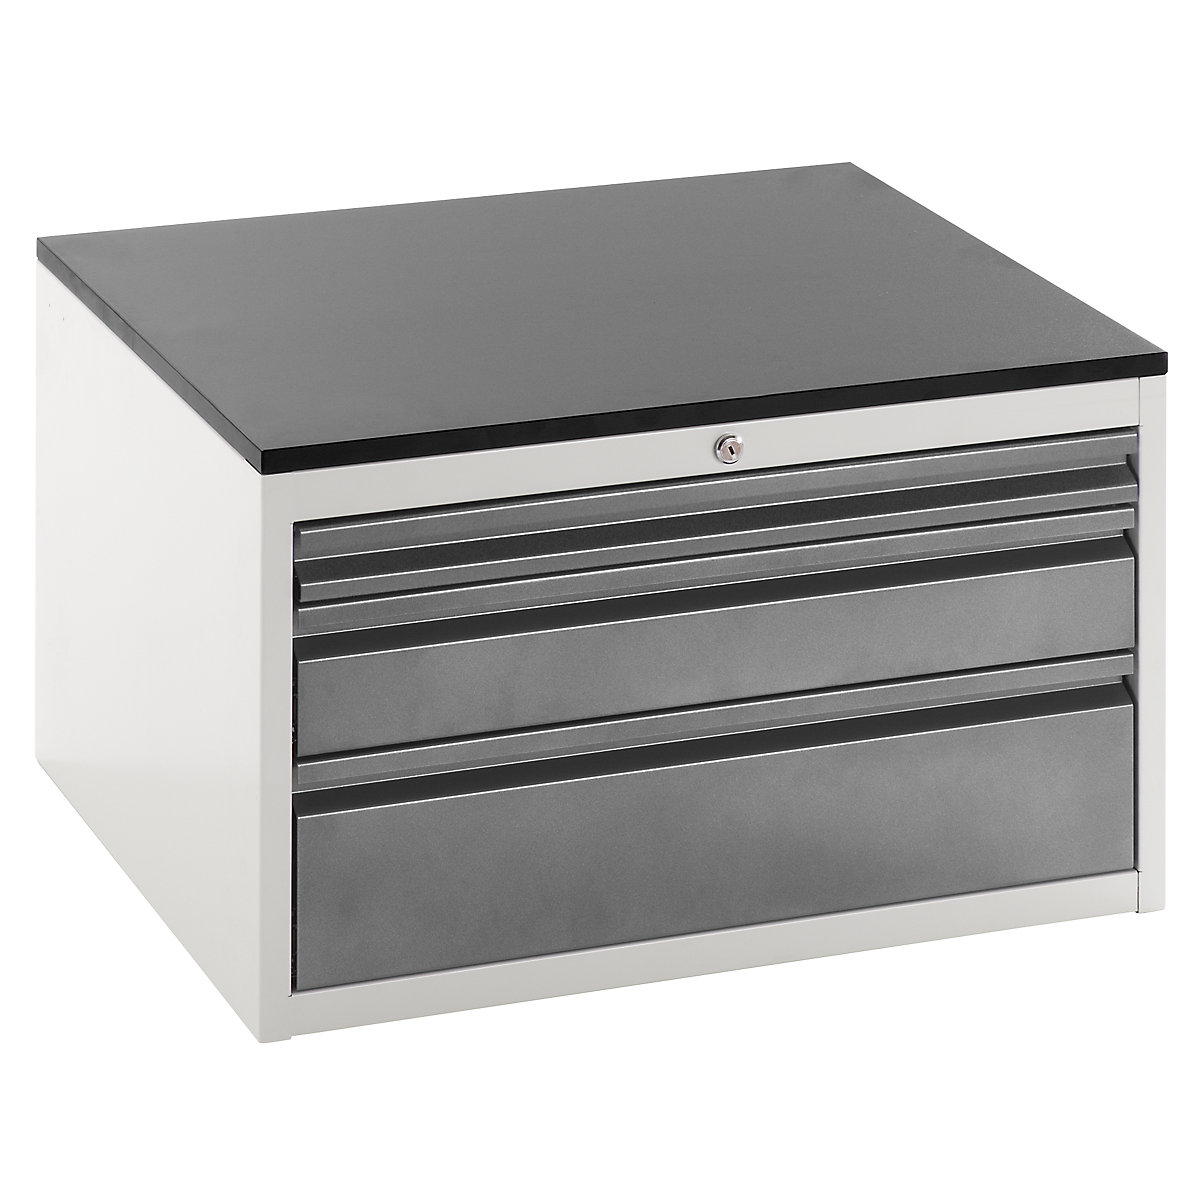 Drawer cupboard with telescopic guides – RAU, height 460 mm, drawers: 1 x 60, 1 x 120, 1 x 180 mm, light grey / charcoal, width 770 mm-14